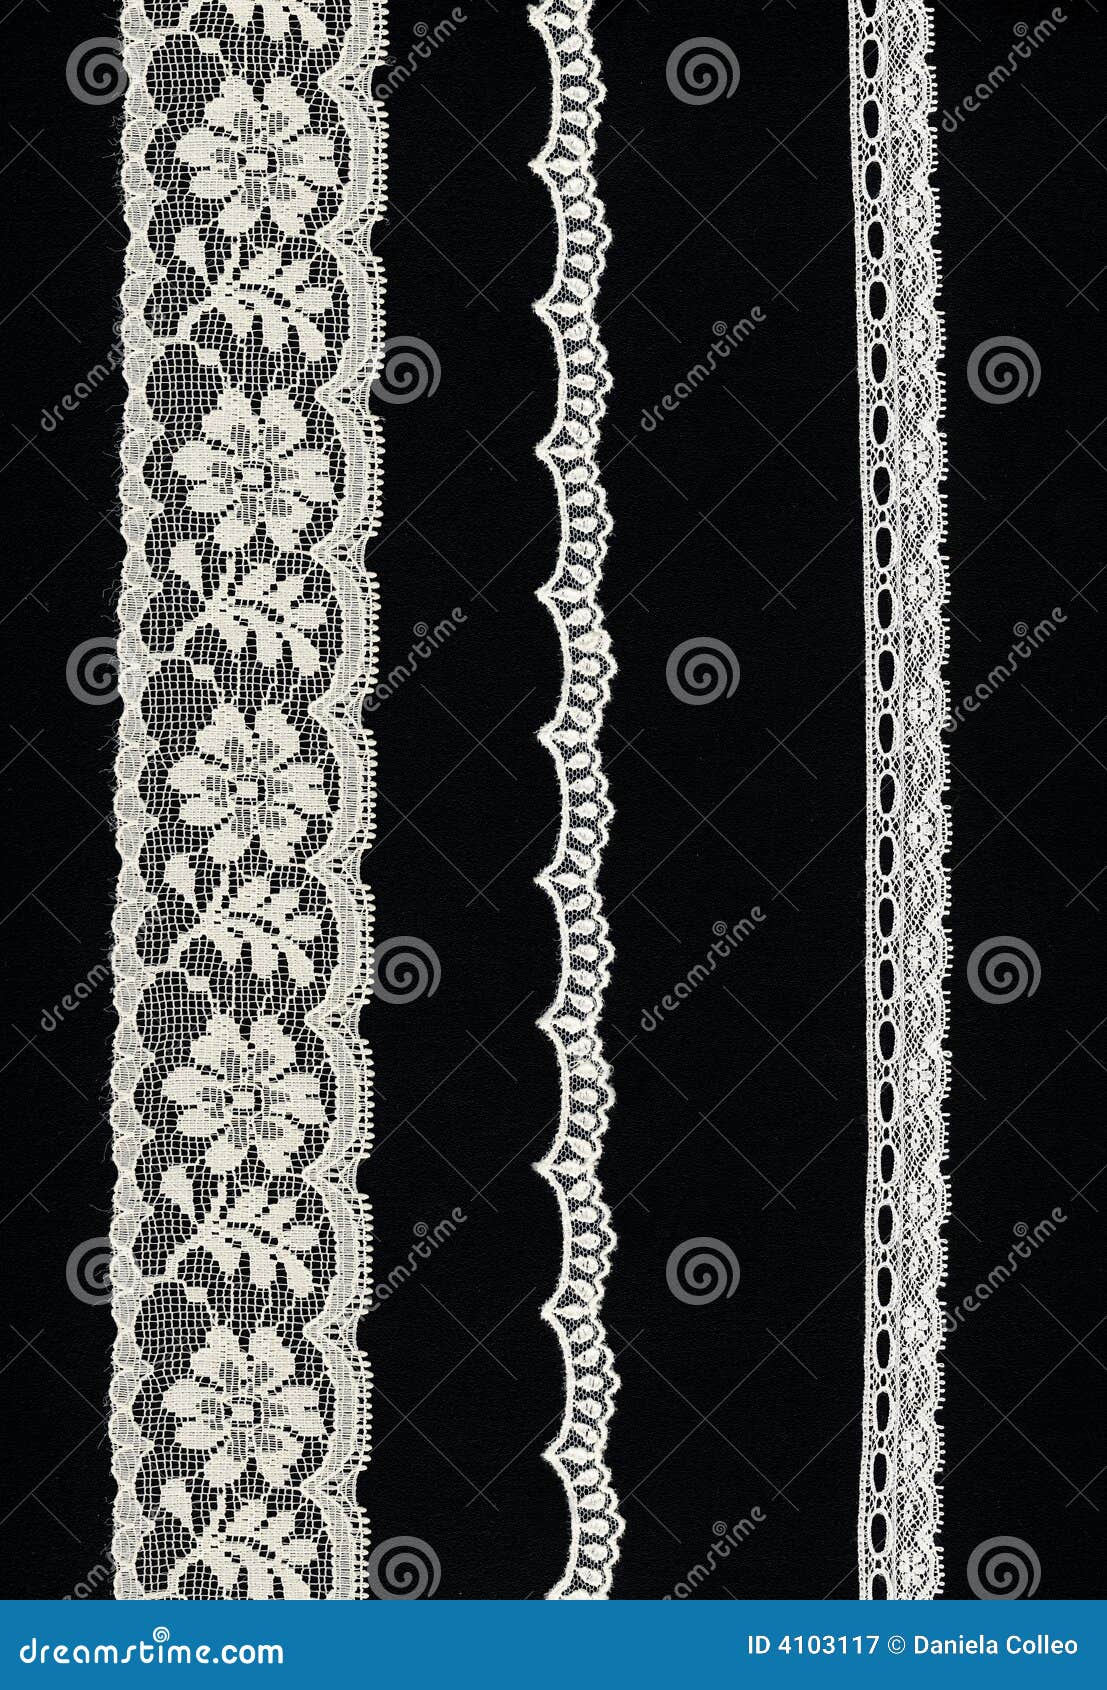 3 delicate lace borders stock image. Image of contour - 4103117